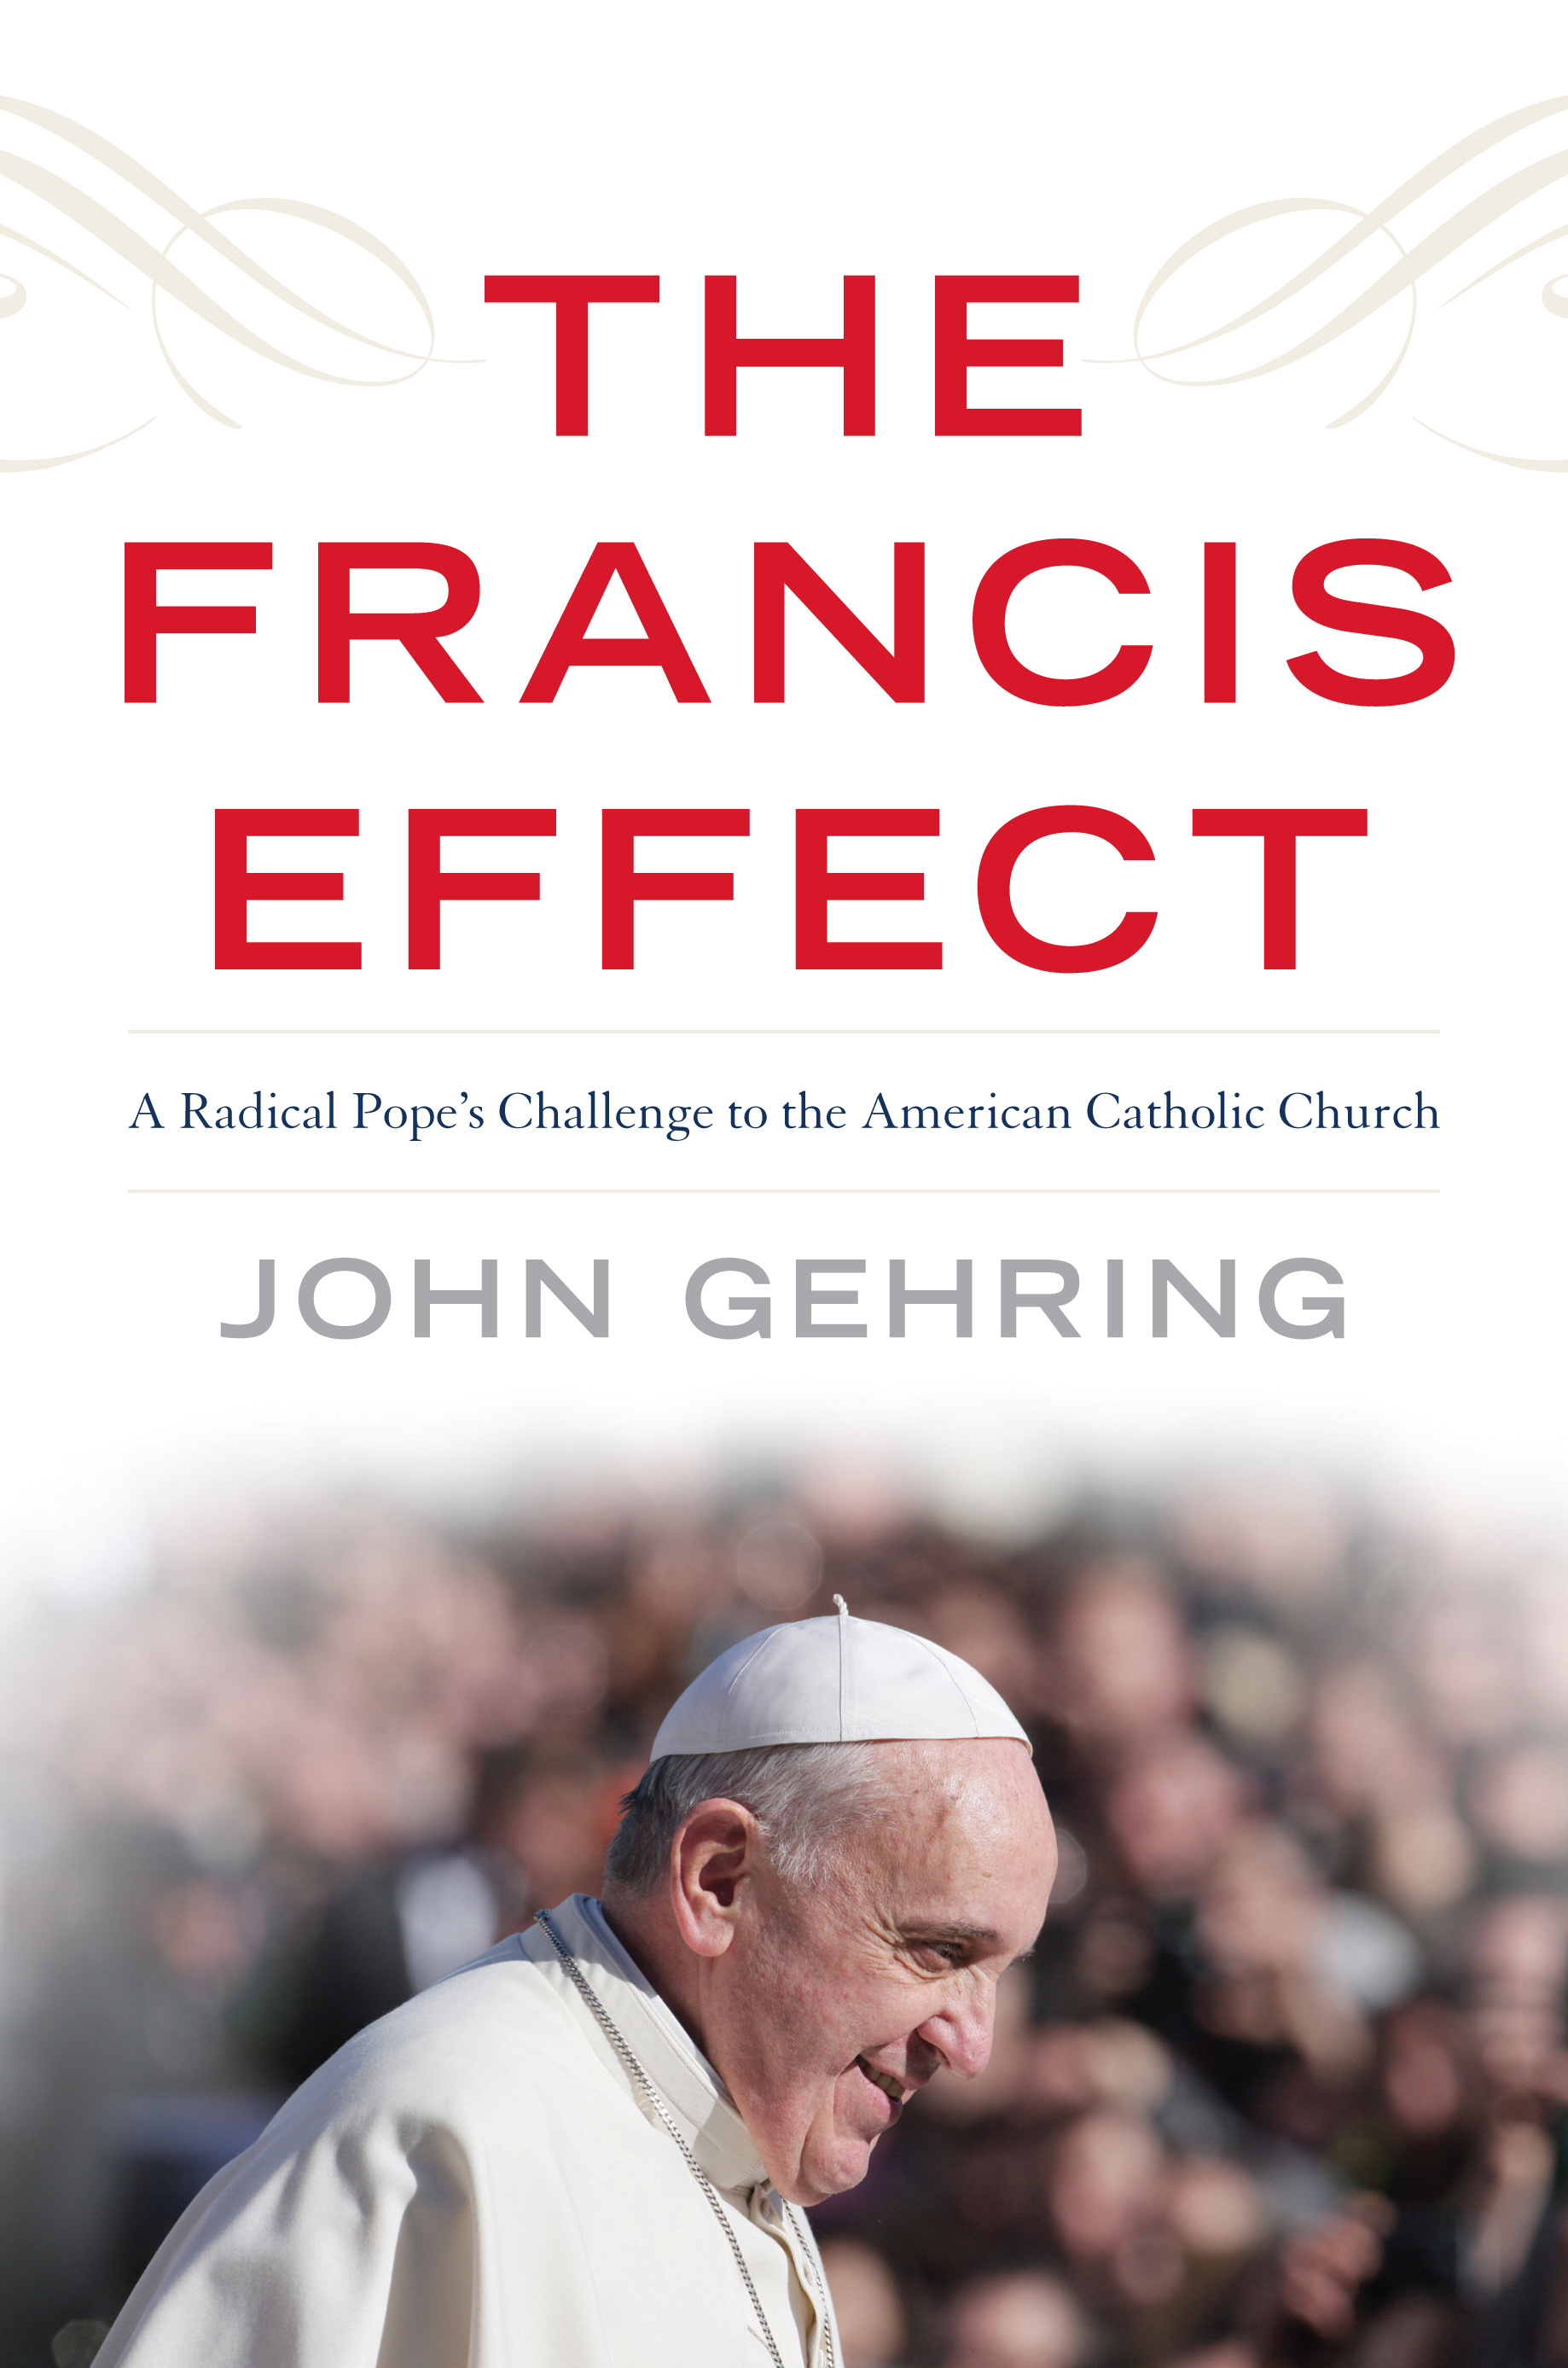 USF will host John Gehring, author of The Francis Effect, on Thurs., Oct. 27 at 4 p.m.